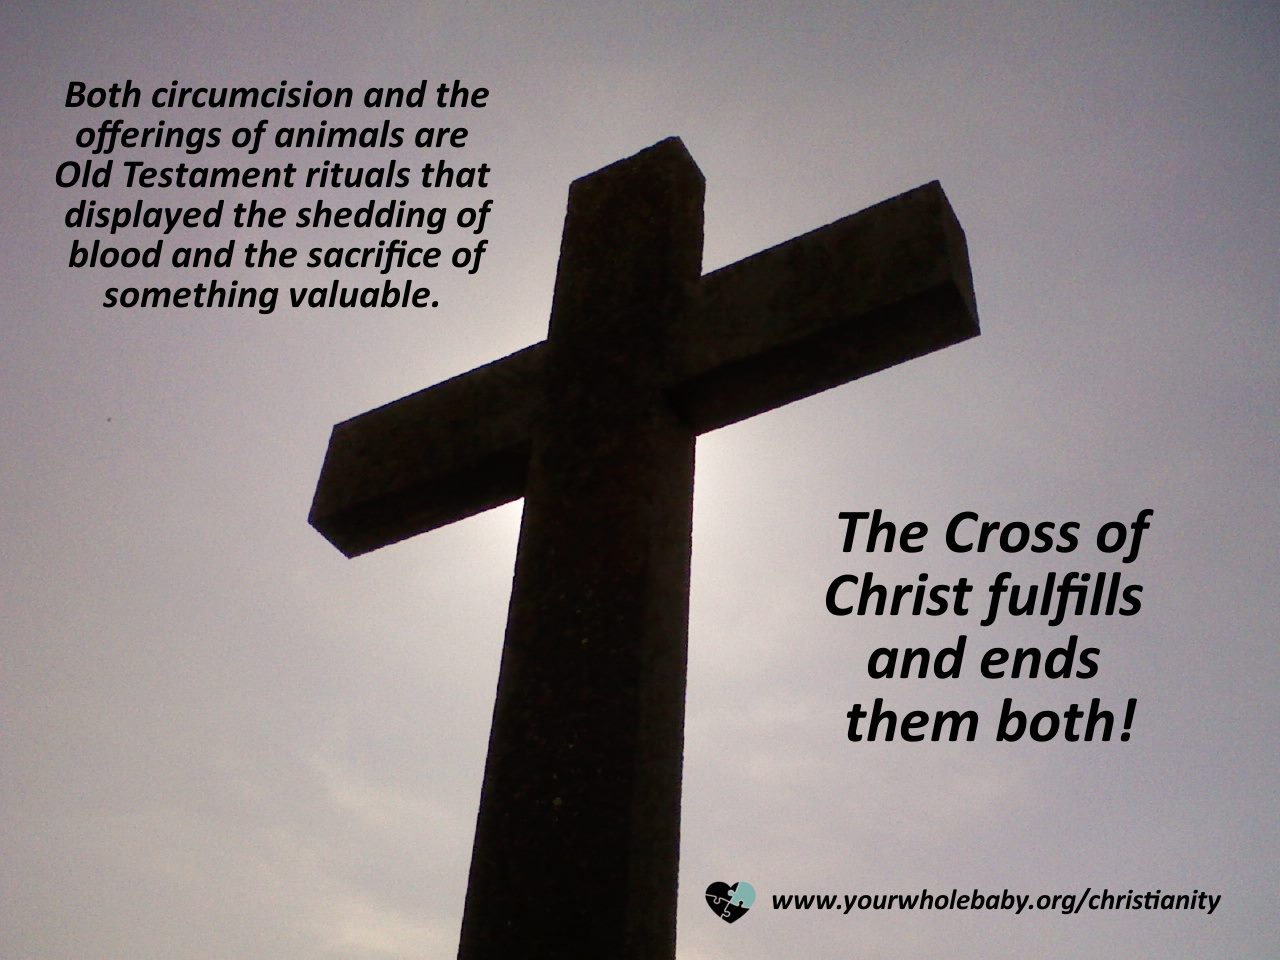  Image: Backlit cross. Text: “Both circumcision and the offerings of animals are Old Testament rituals that displayed the shedding of blood and the sacrifice of something valuable. The Cross of Christ fulfills and ends them both!” www.yourwholebaby.o